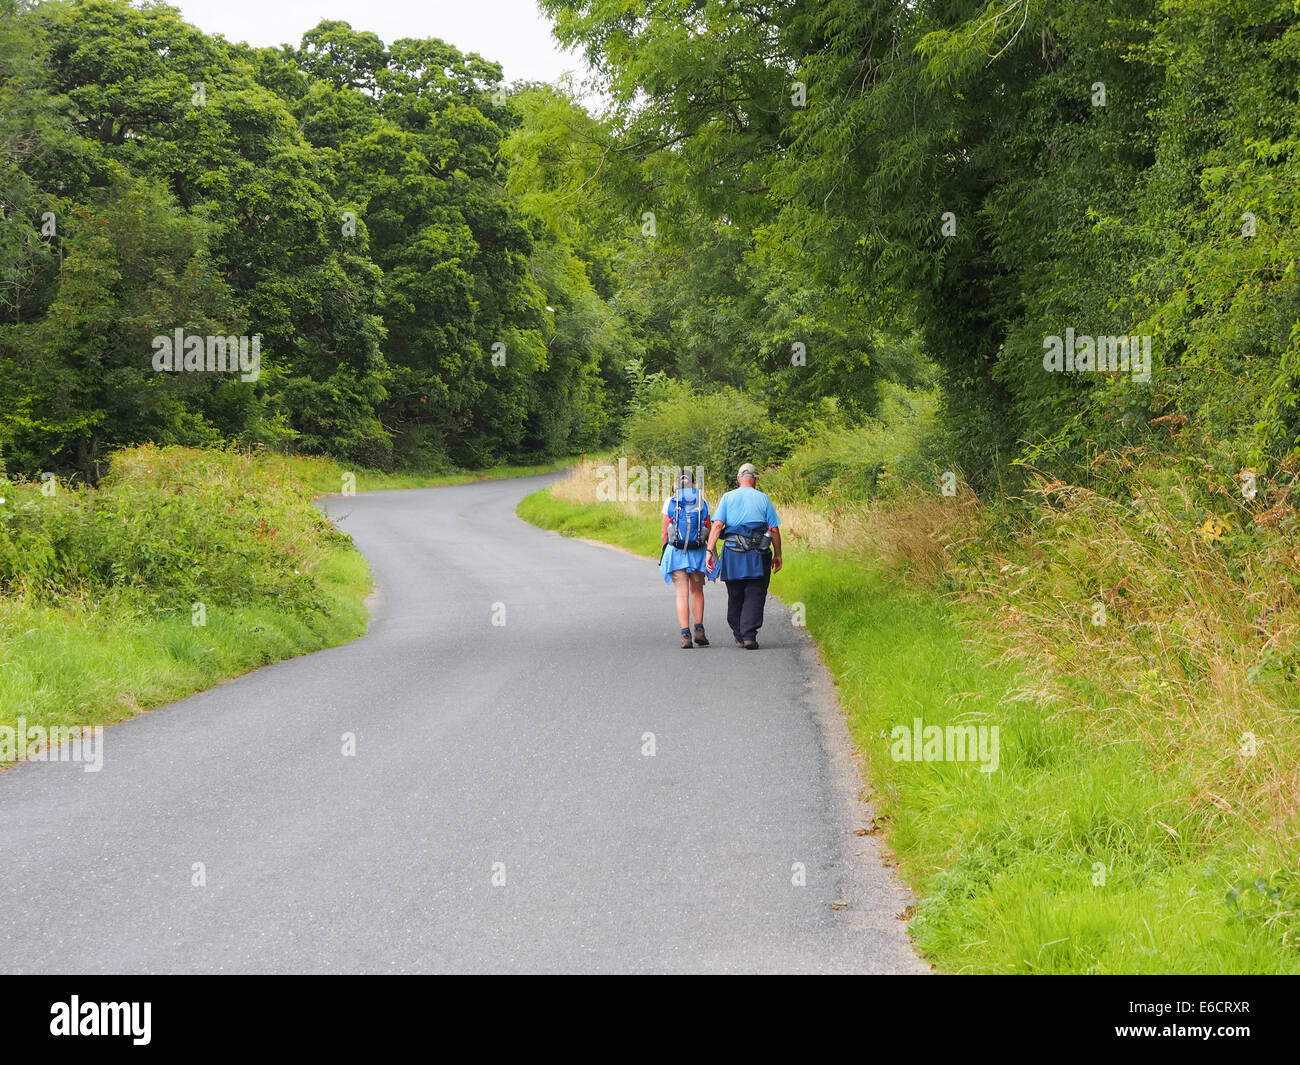 Hikers walking at the side of a country lane with no pavement. Stock Photo